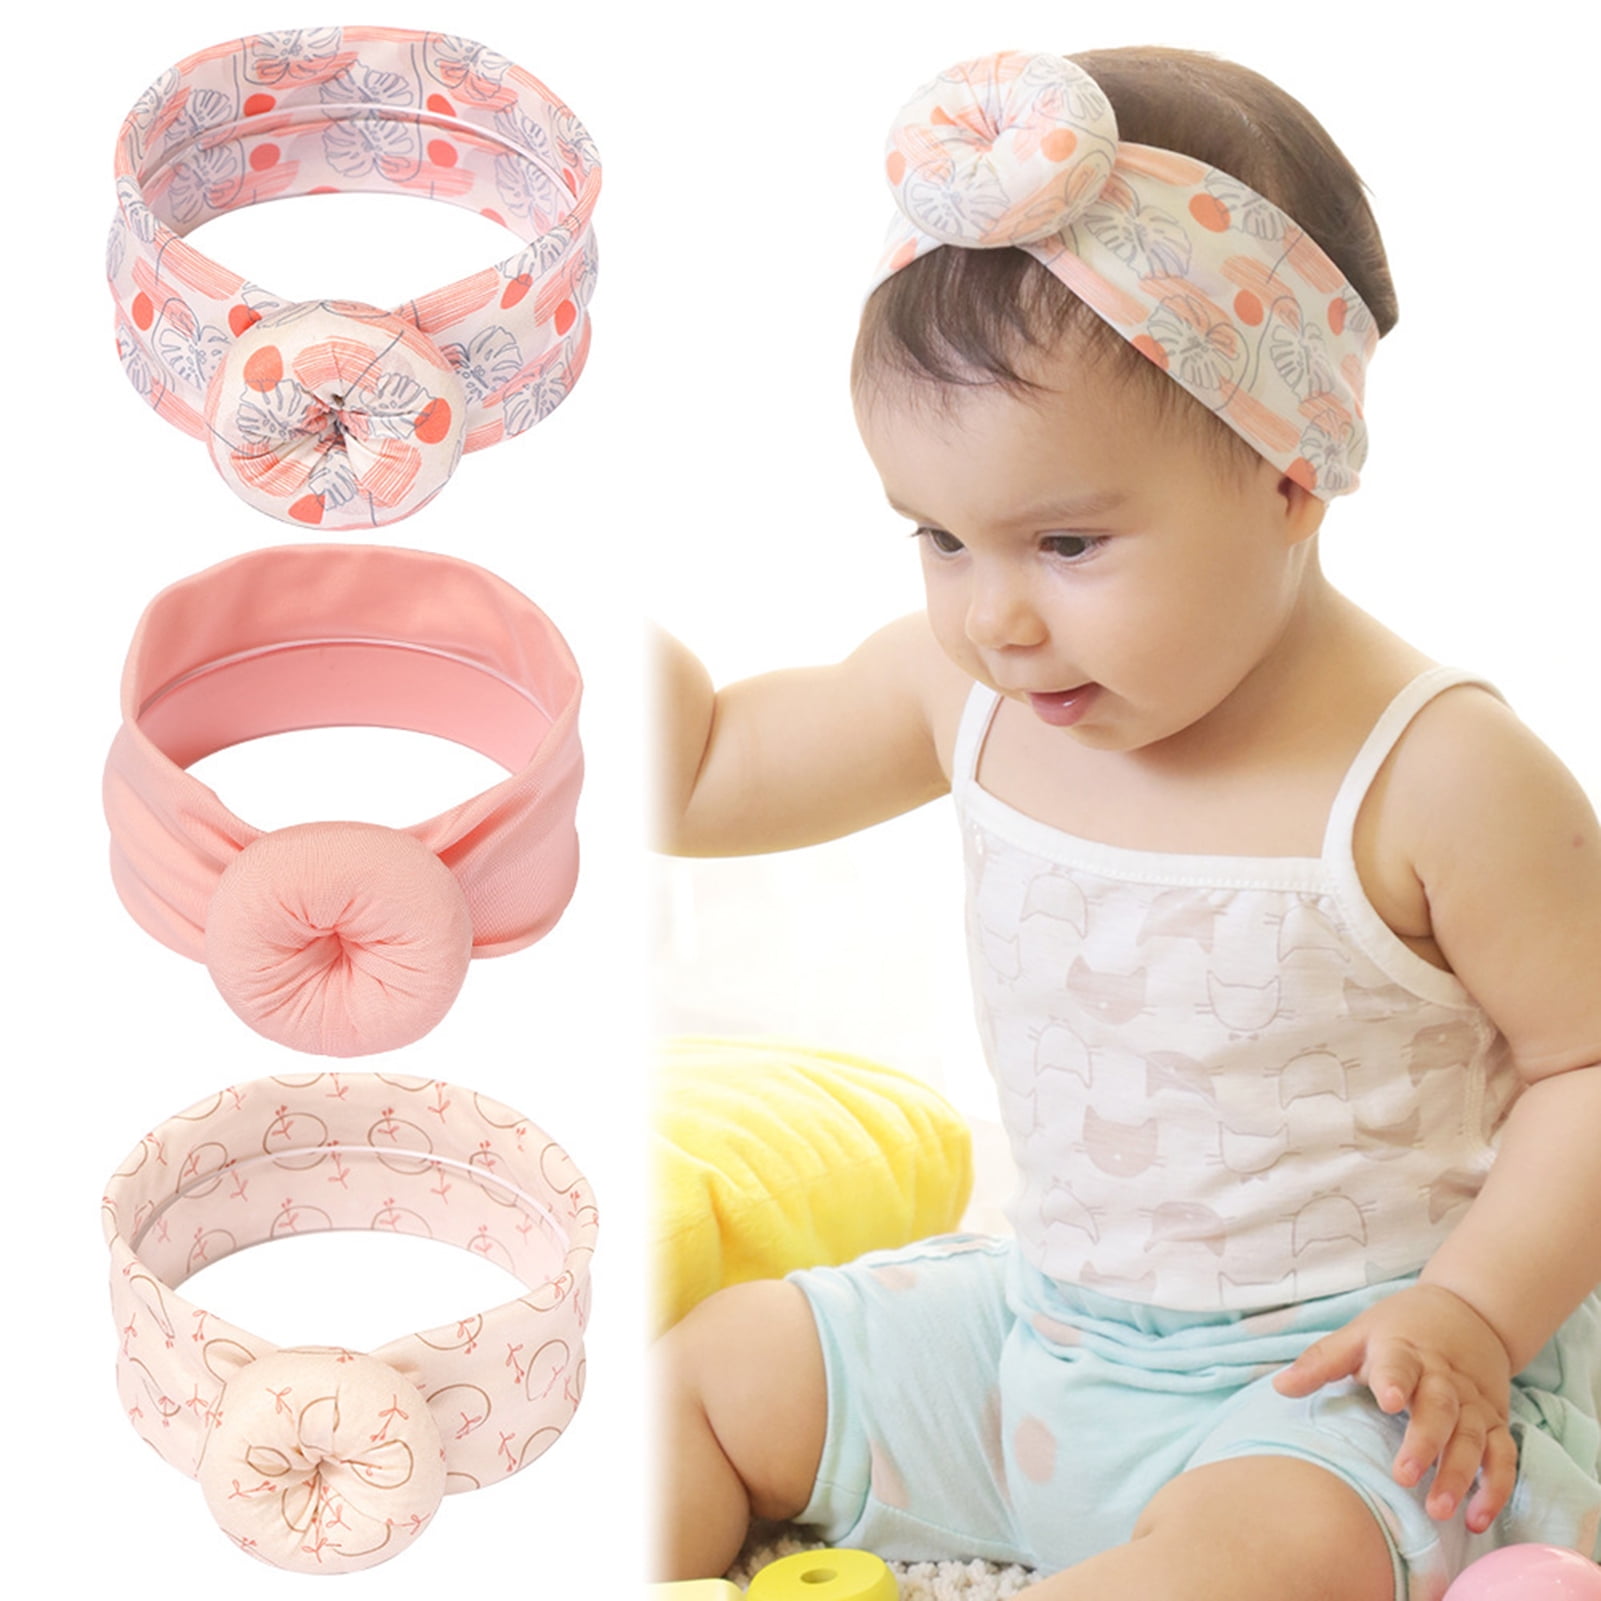 Lubelski Infant Headband Pattern Design Hair Accessories Skin Friendly Baby  Girls Donut Knot Hair Band for Photography | Walmart Canada